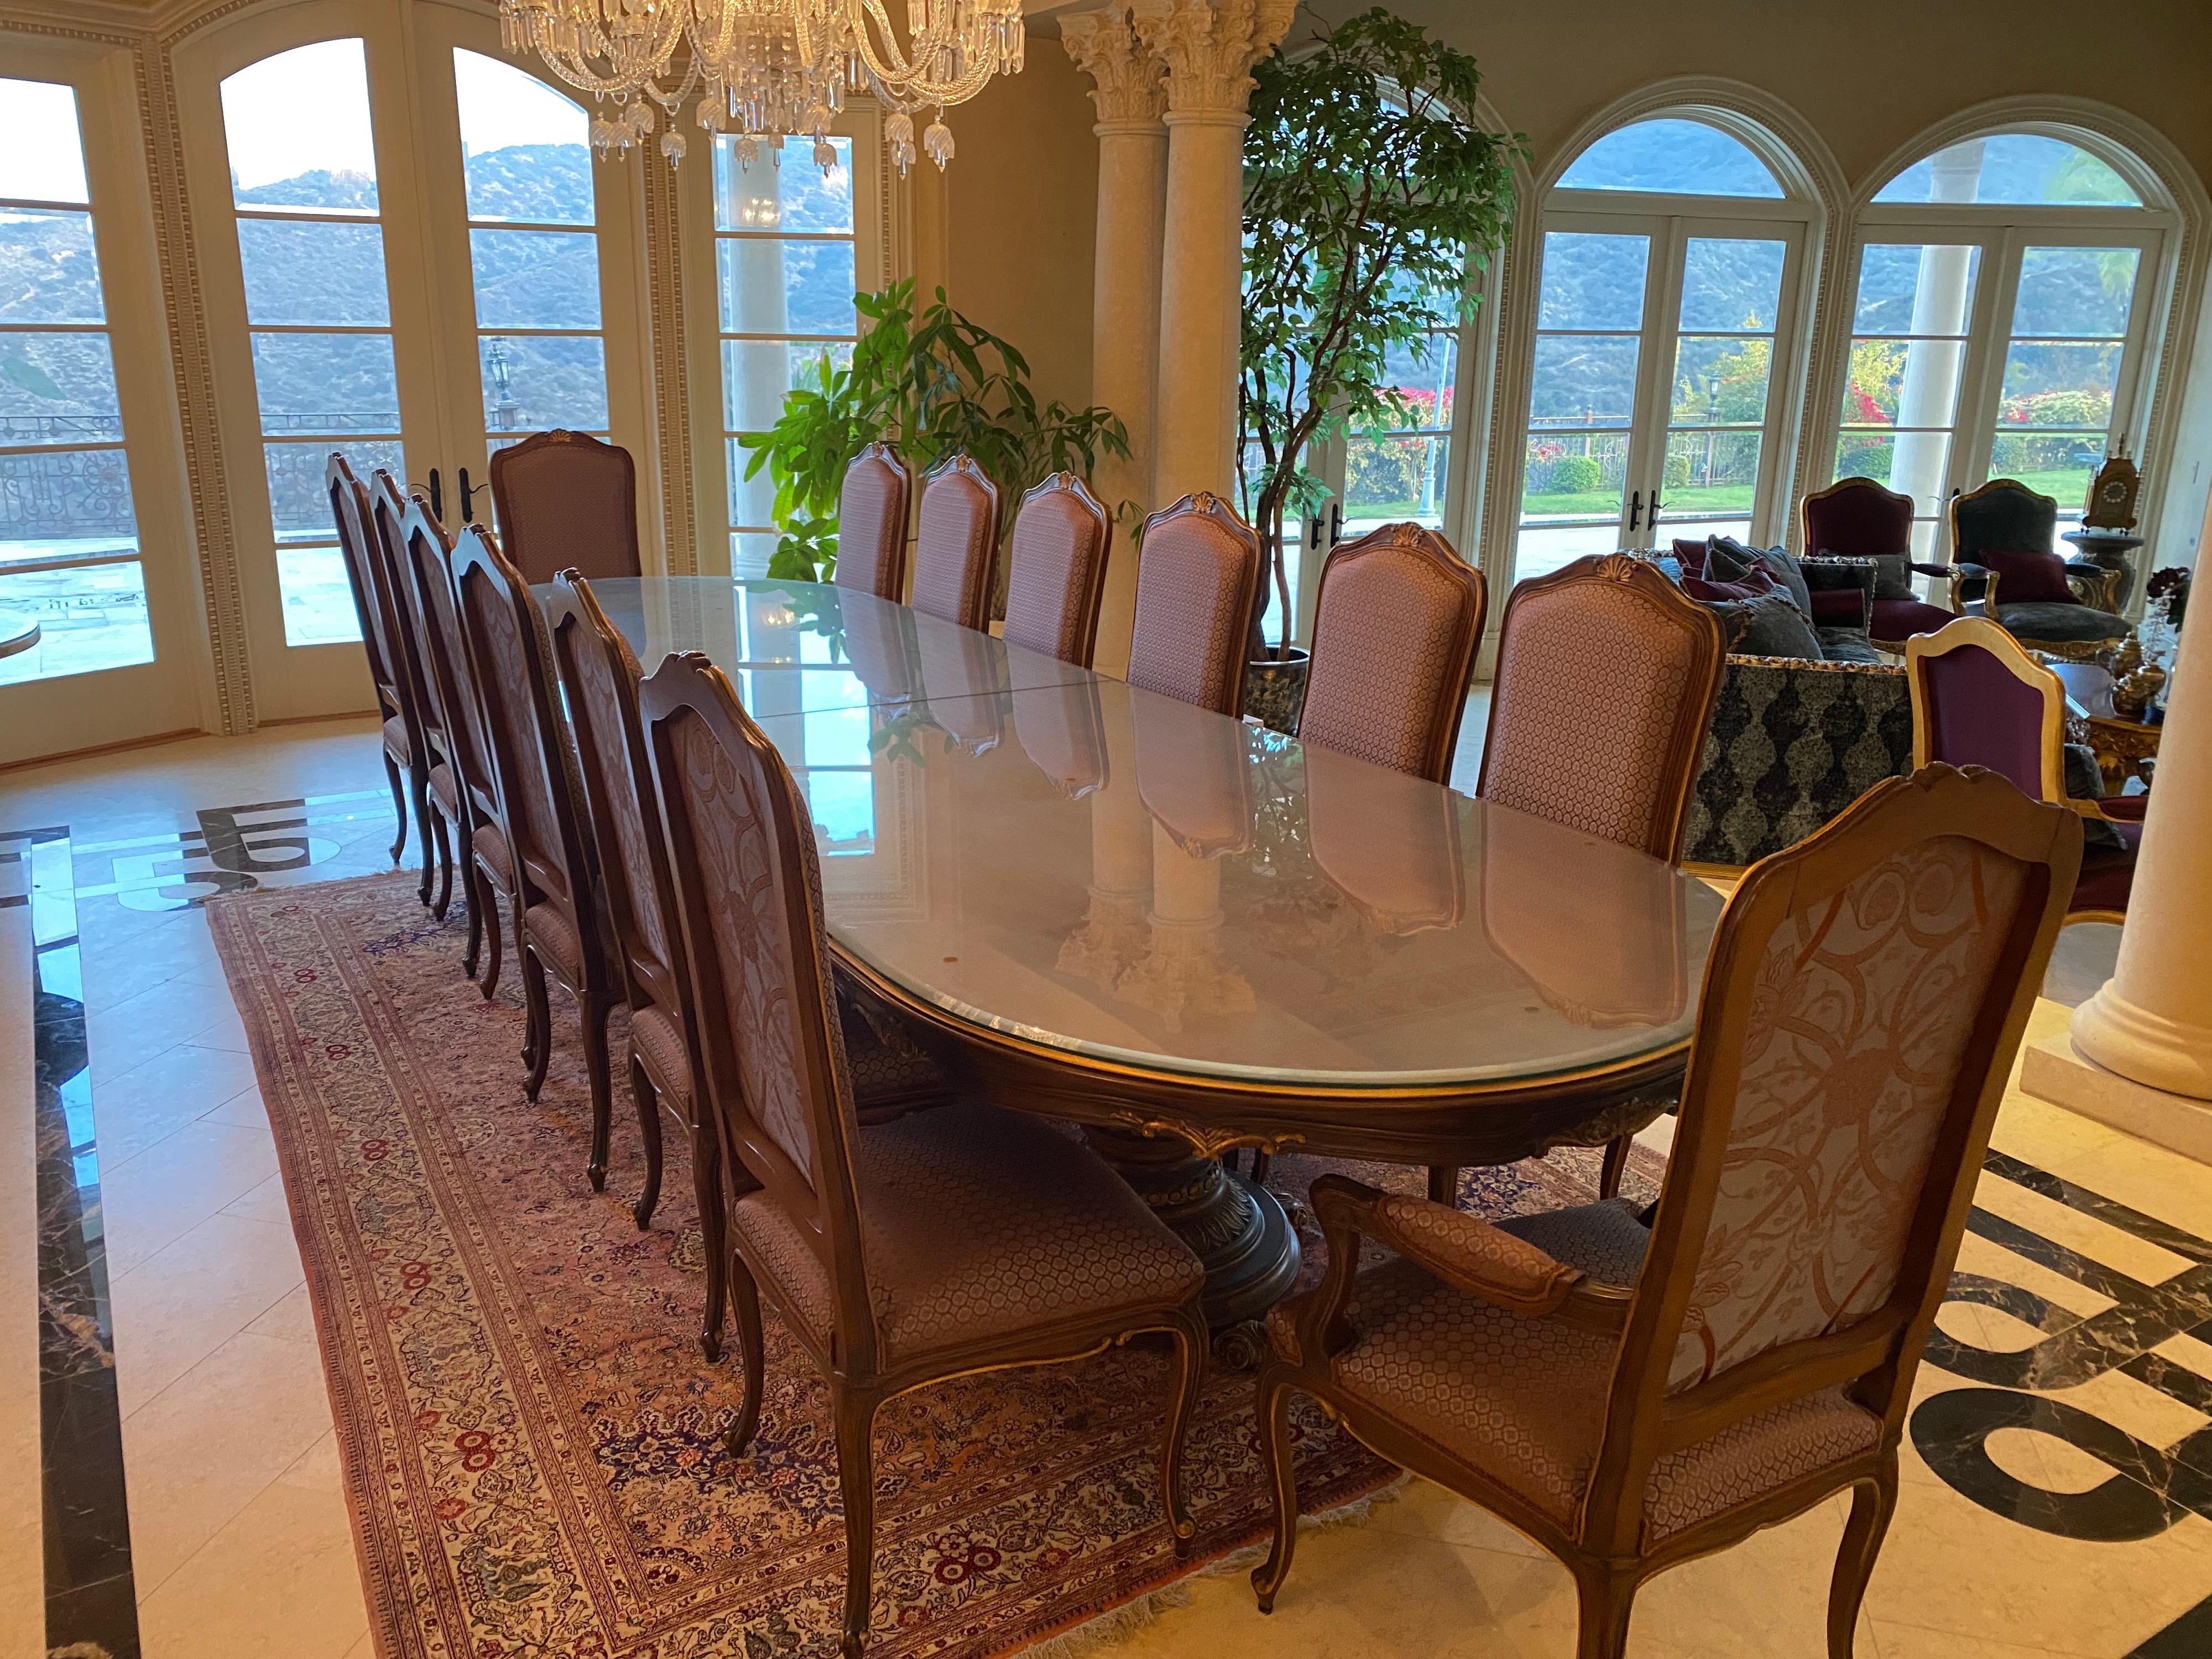 A Custom Made Italian Mahogany Dining Room Table and Fourteen Chairs 

The table was never used, chairs and table in excellent condition

For any questions or concerns, please do not hesitate to ask. 

